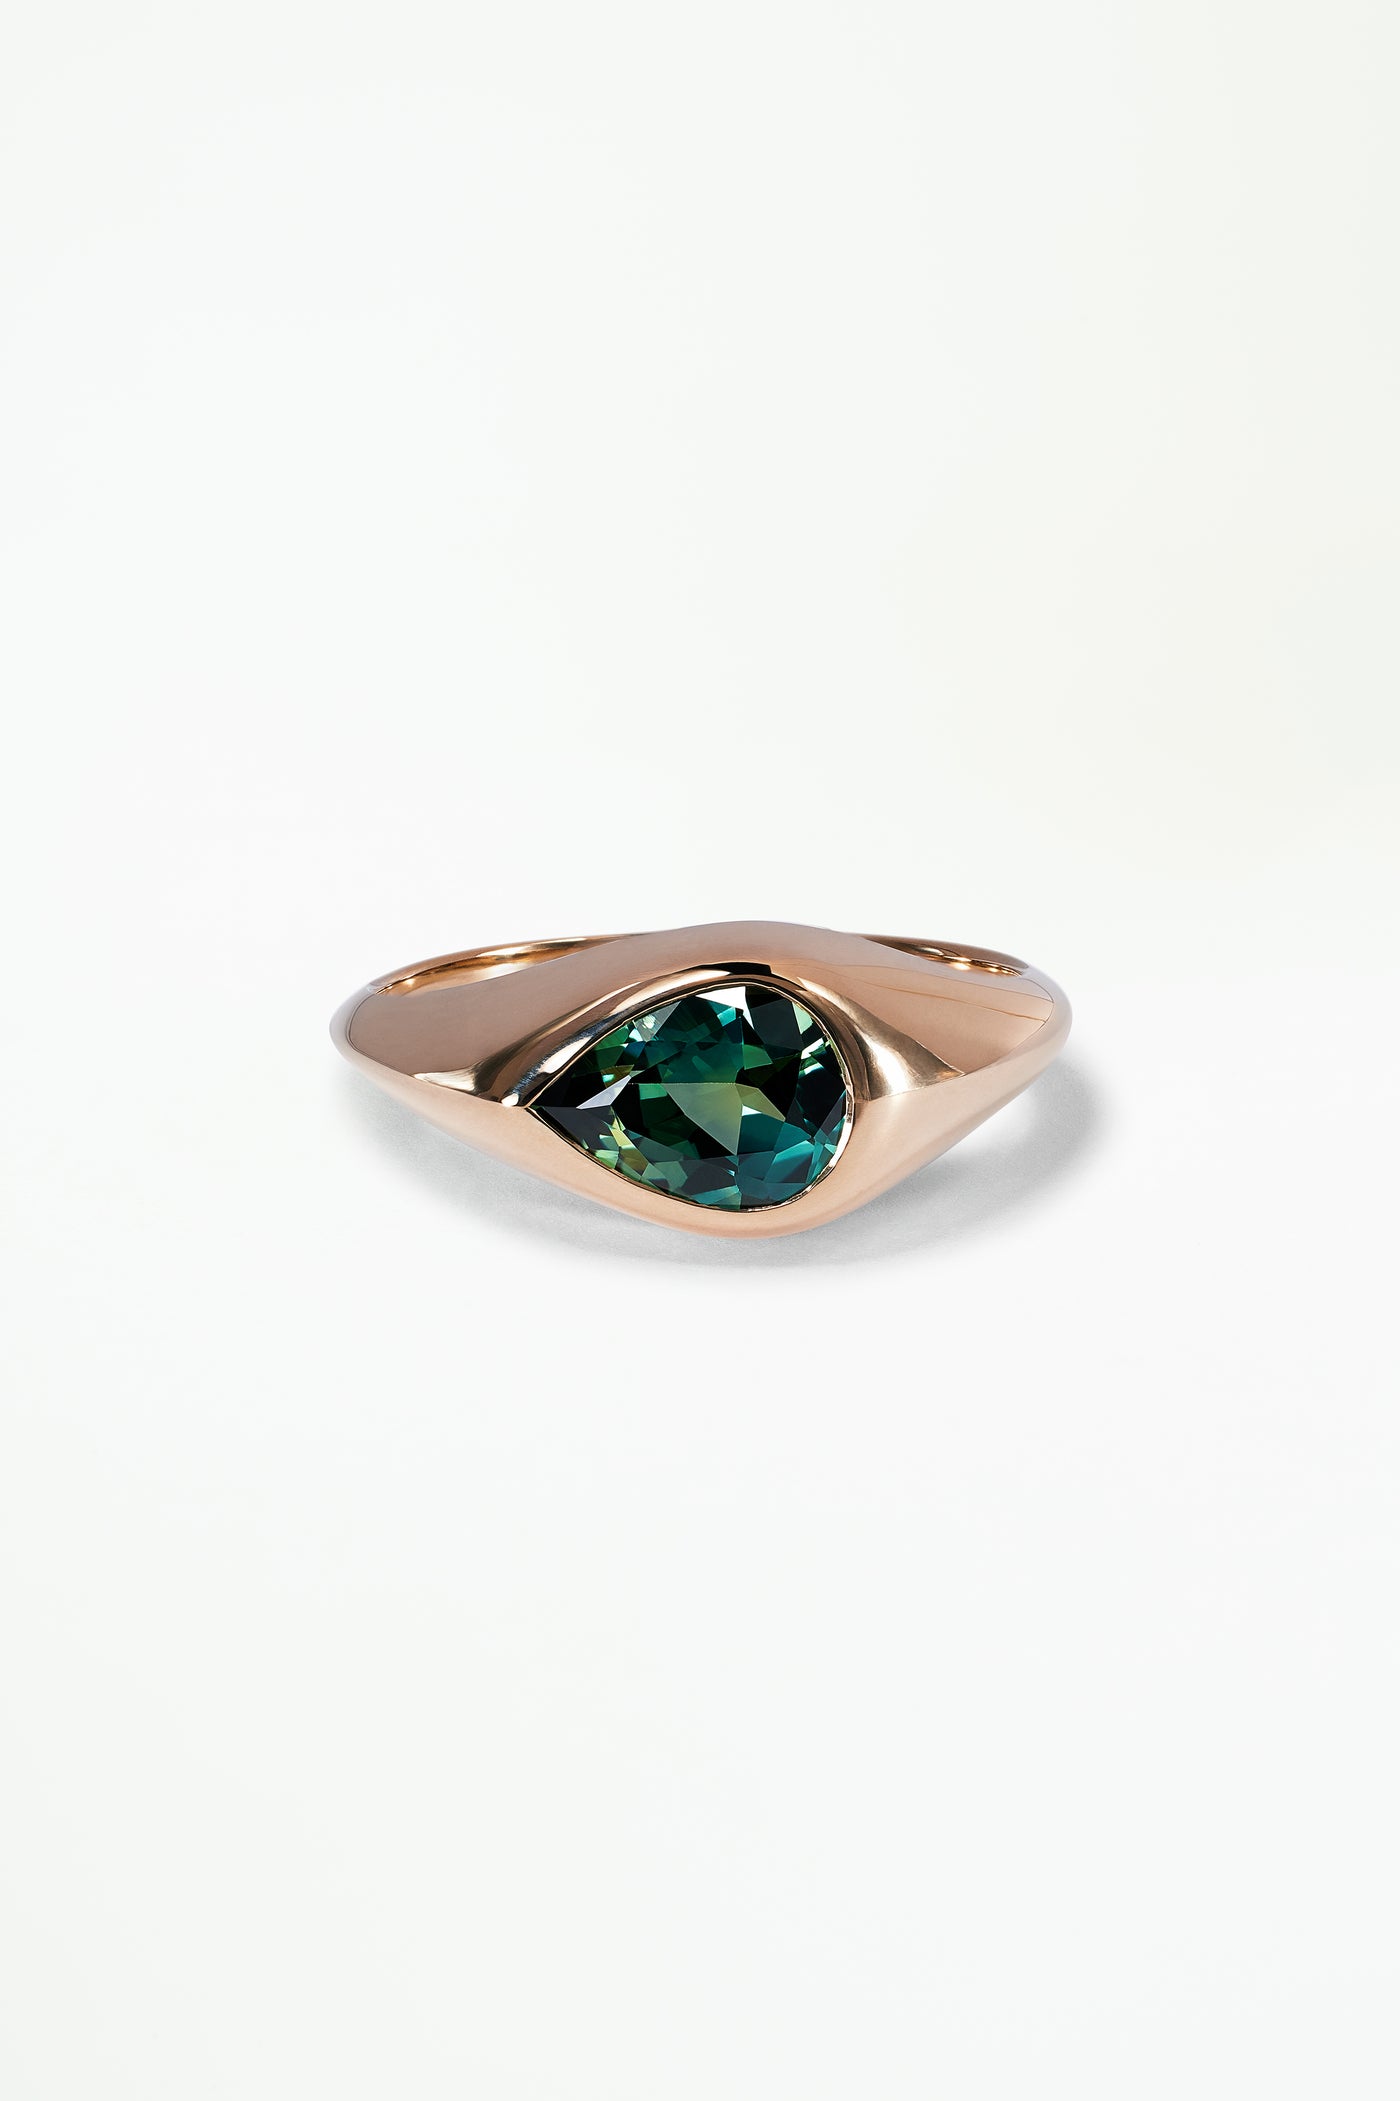 One of a Kind Pear Cut Bi-Color Blue Green Sapphire Signet Ring No. 59